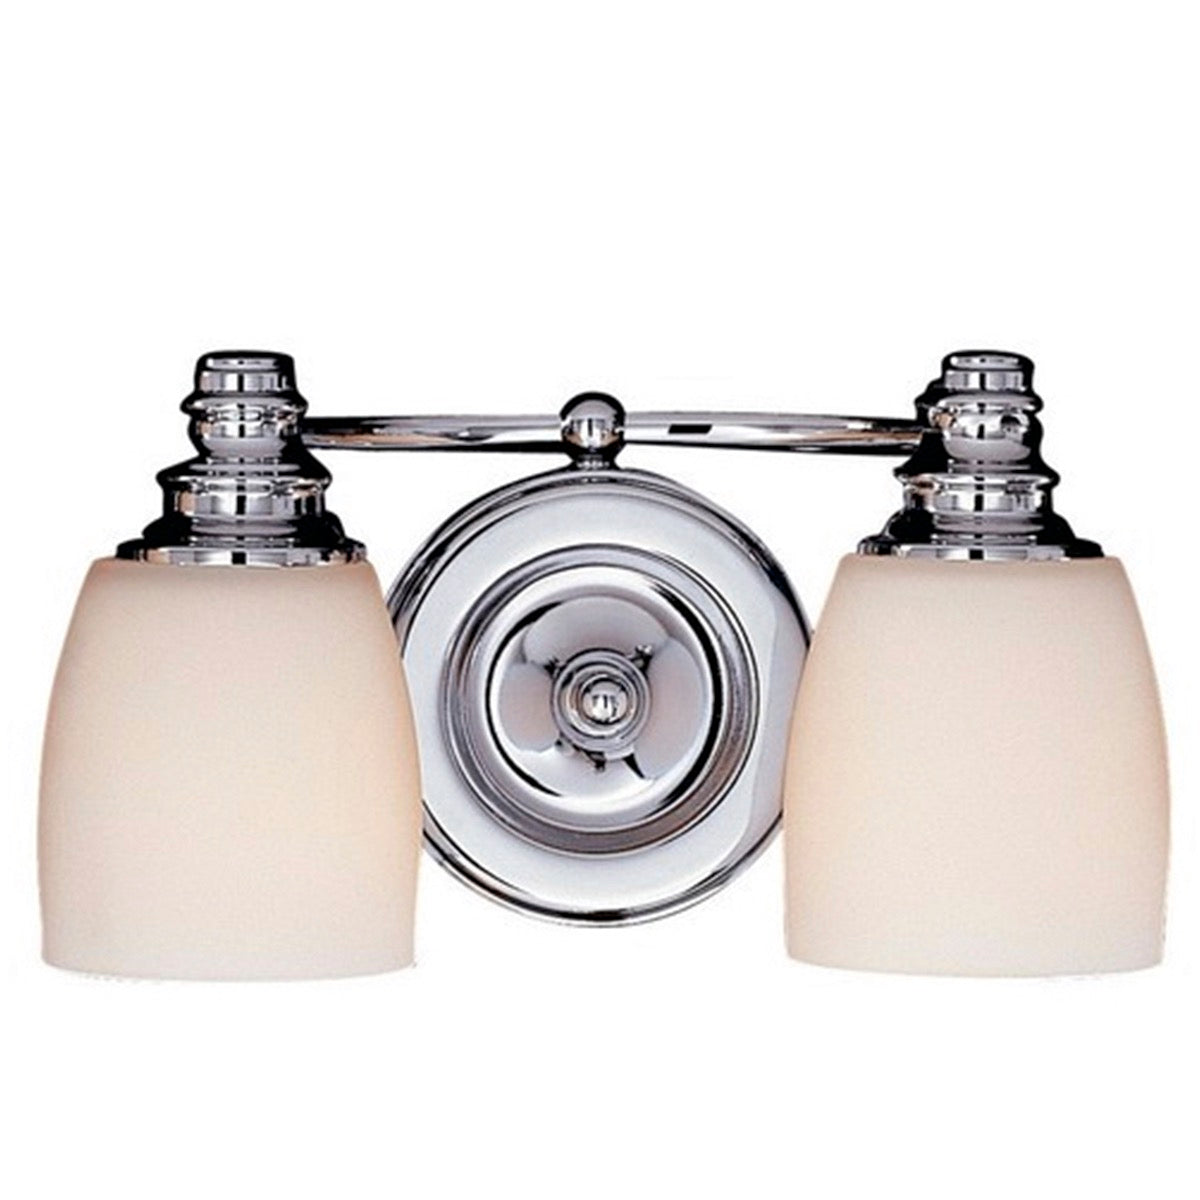 Bentley 2L wall sconce - VS7402CH